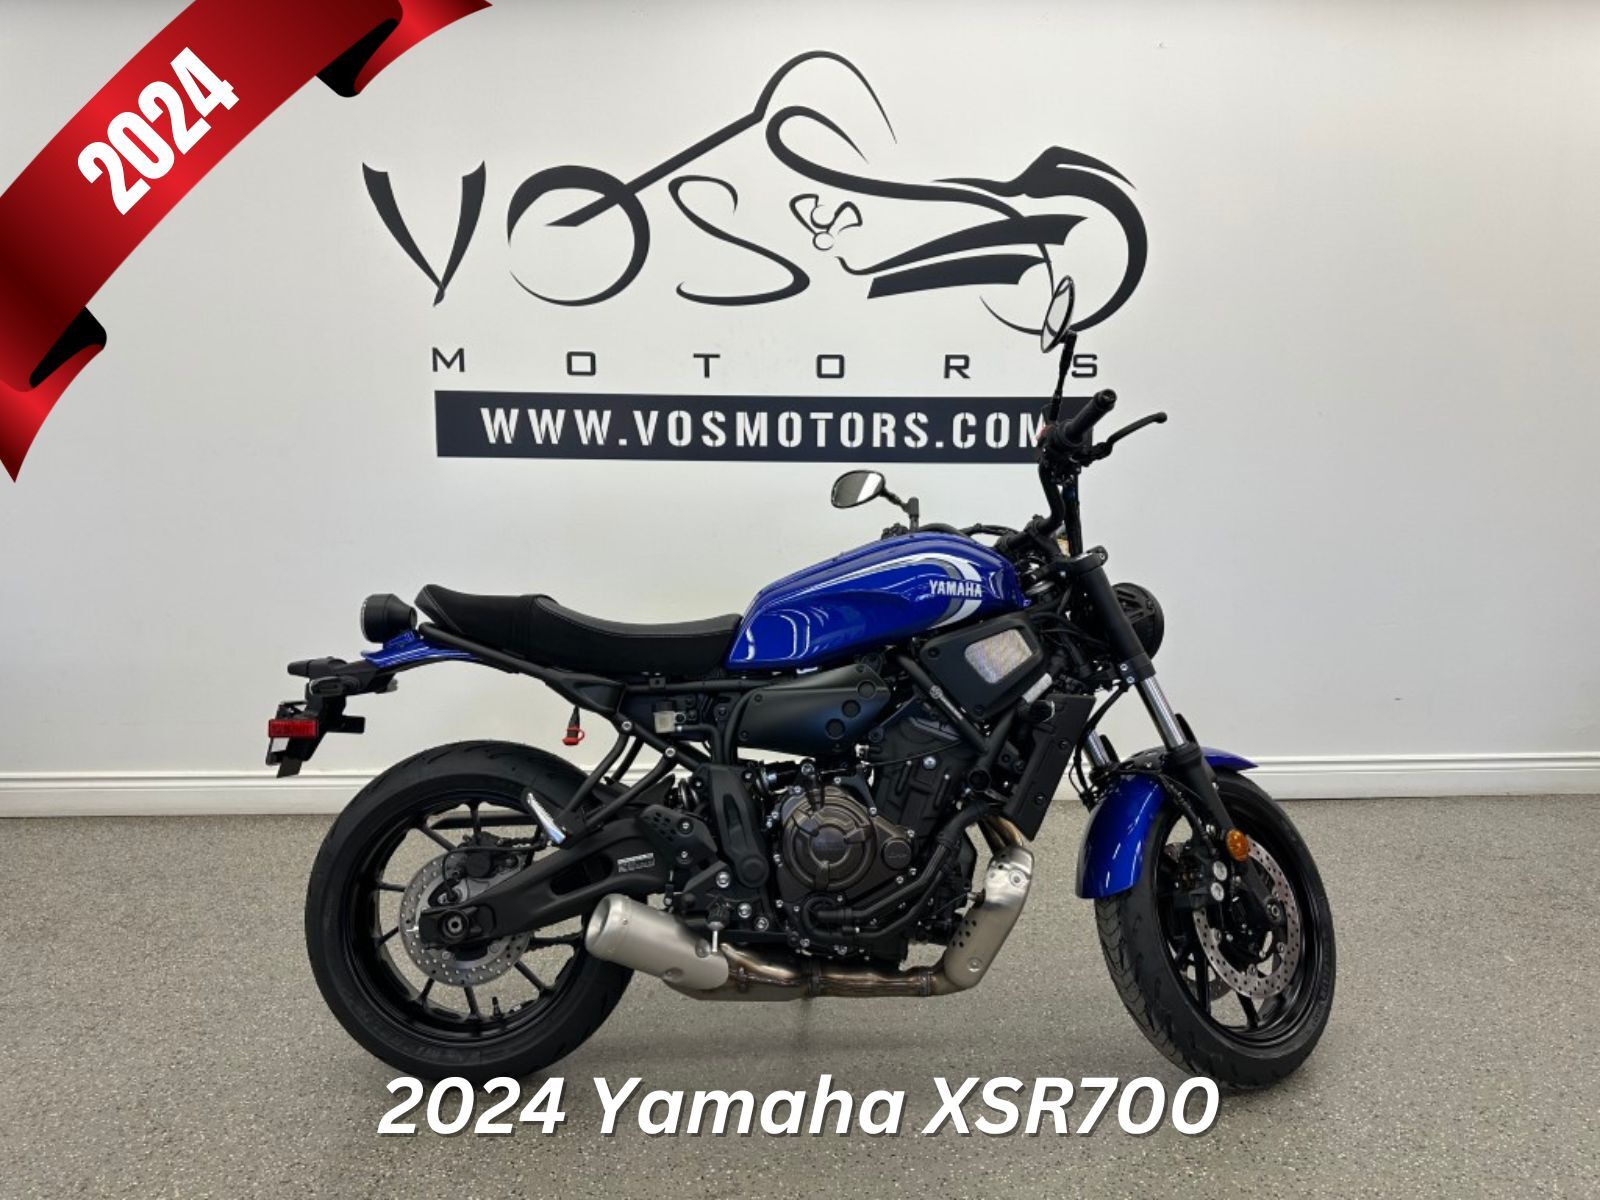 2024 Yamaha XSR700ARL XSR700 - V6061 - -No Payments for 1 Year**